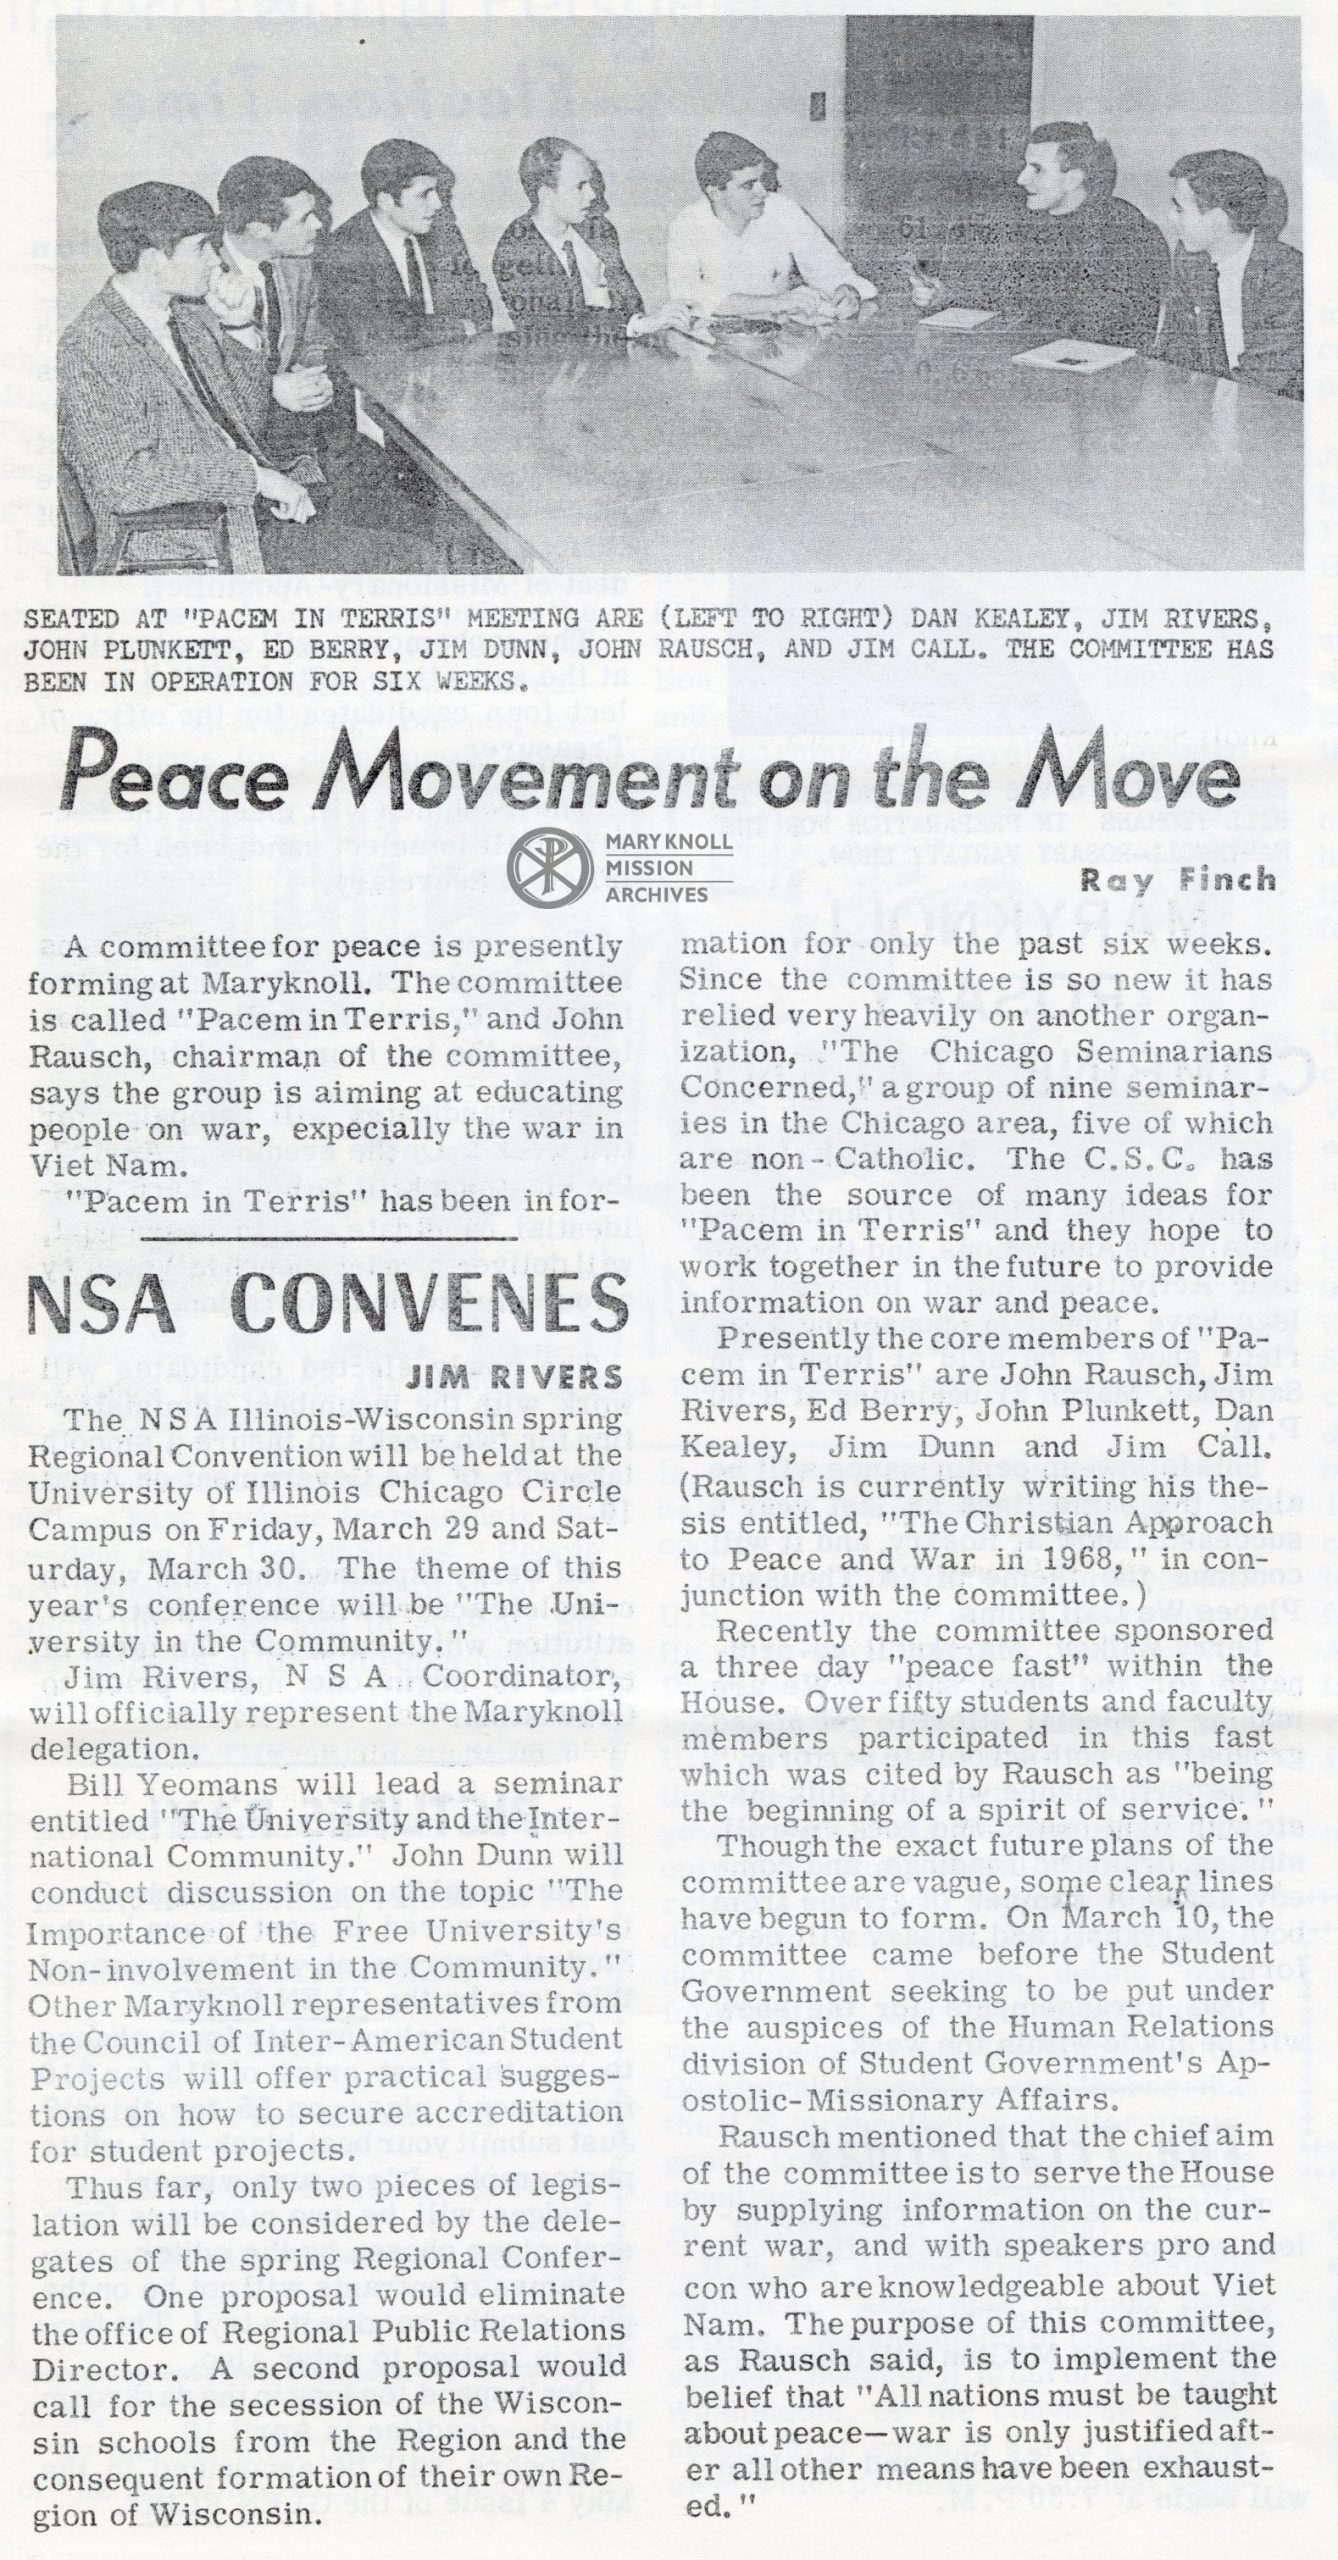 Sem. Ray Finch's Article on Peace Movement, "The Glen Echo" vo. 1 no. 8 pg. 6